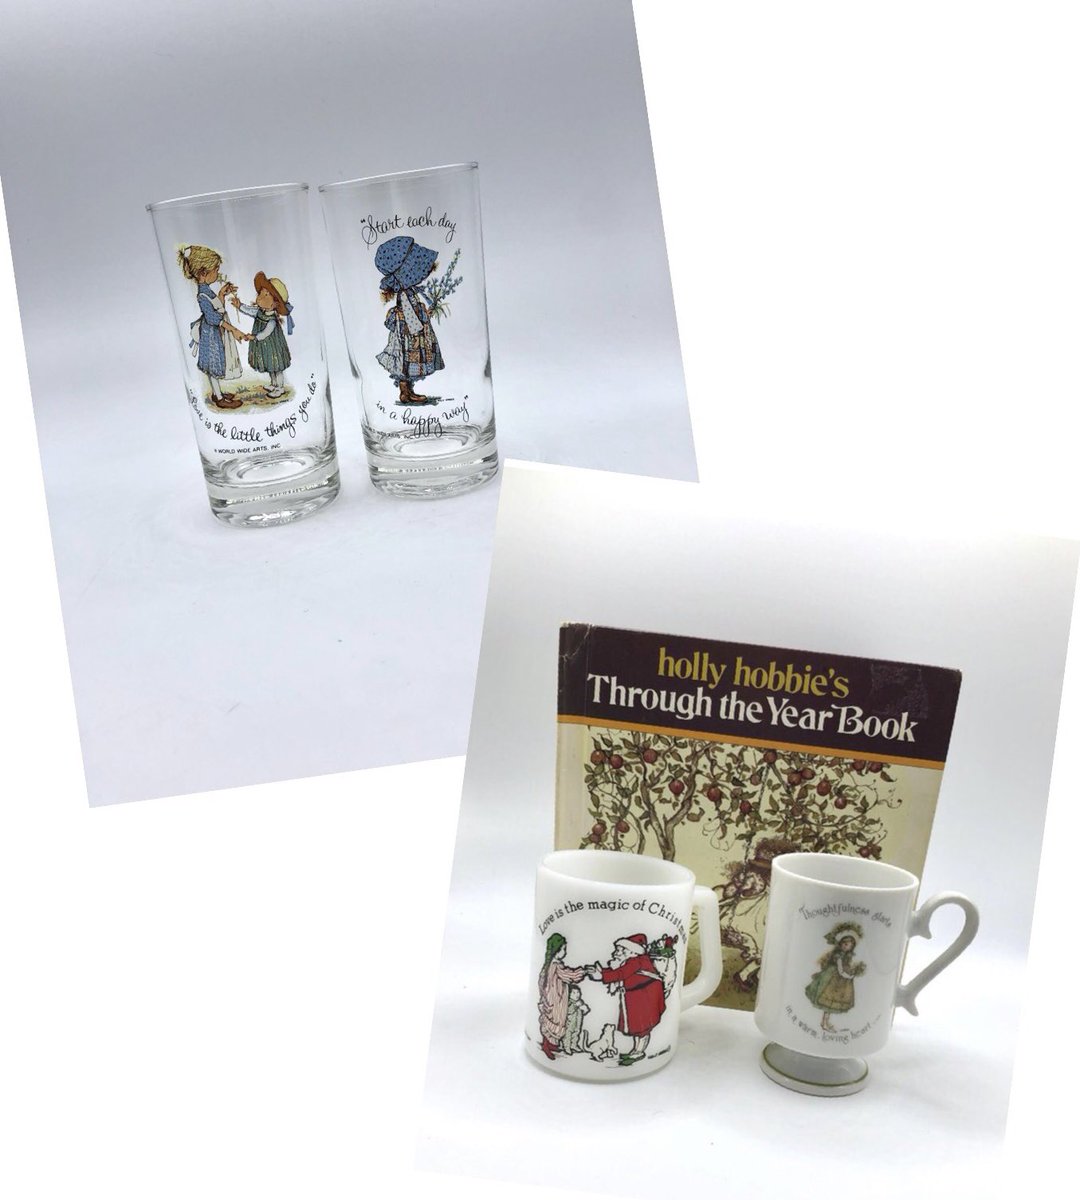 You can find these classic Holly Hobbie glasses & books on @Etsy @beezyandco - link in bio #etsy #vintage #hollyhobbie #holly #hobbie #book #glass #collectible #happy #love #gift #gifting #giftideas #christmasgiftideas #christmascountdown #christmasshopping #etsygifts #etsyfinds